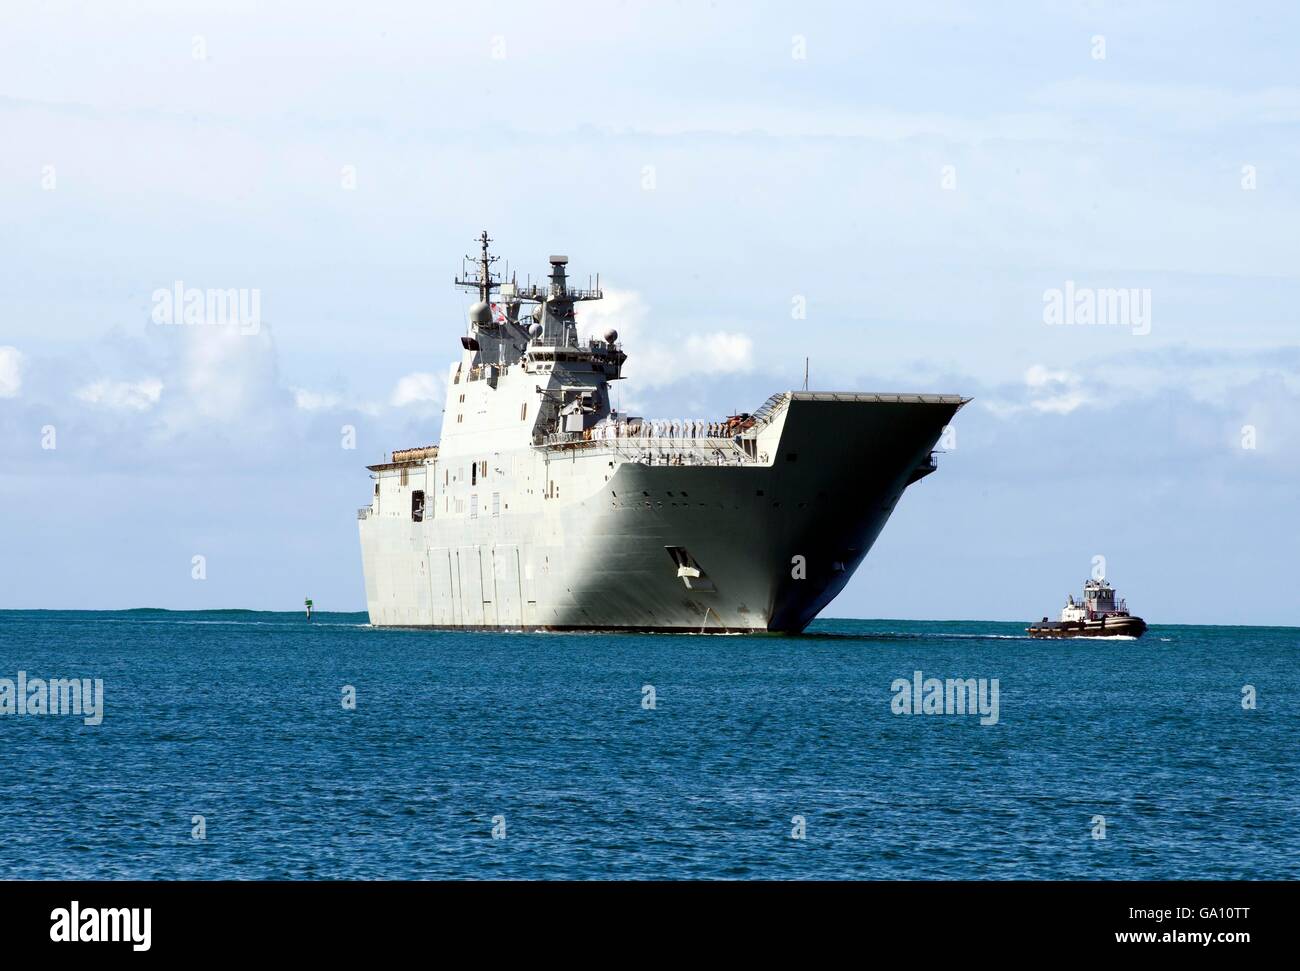 Royal Australian Navy Canberra-class landing helicopter dock ship HMAS Canberra pulls into Pearl Harbor for the annual Rim of the Pacific multi-national exercises June 28, 2016 in Honolulu, Hawaii. Twenty-six nations, more than 40 ships and submarines, will take part in the world's largest international maritime exercise. Stock Photo